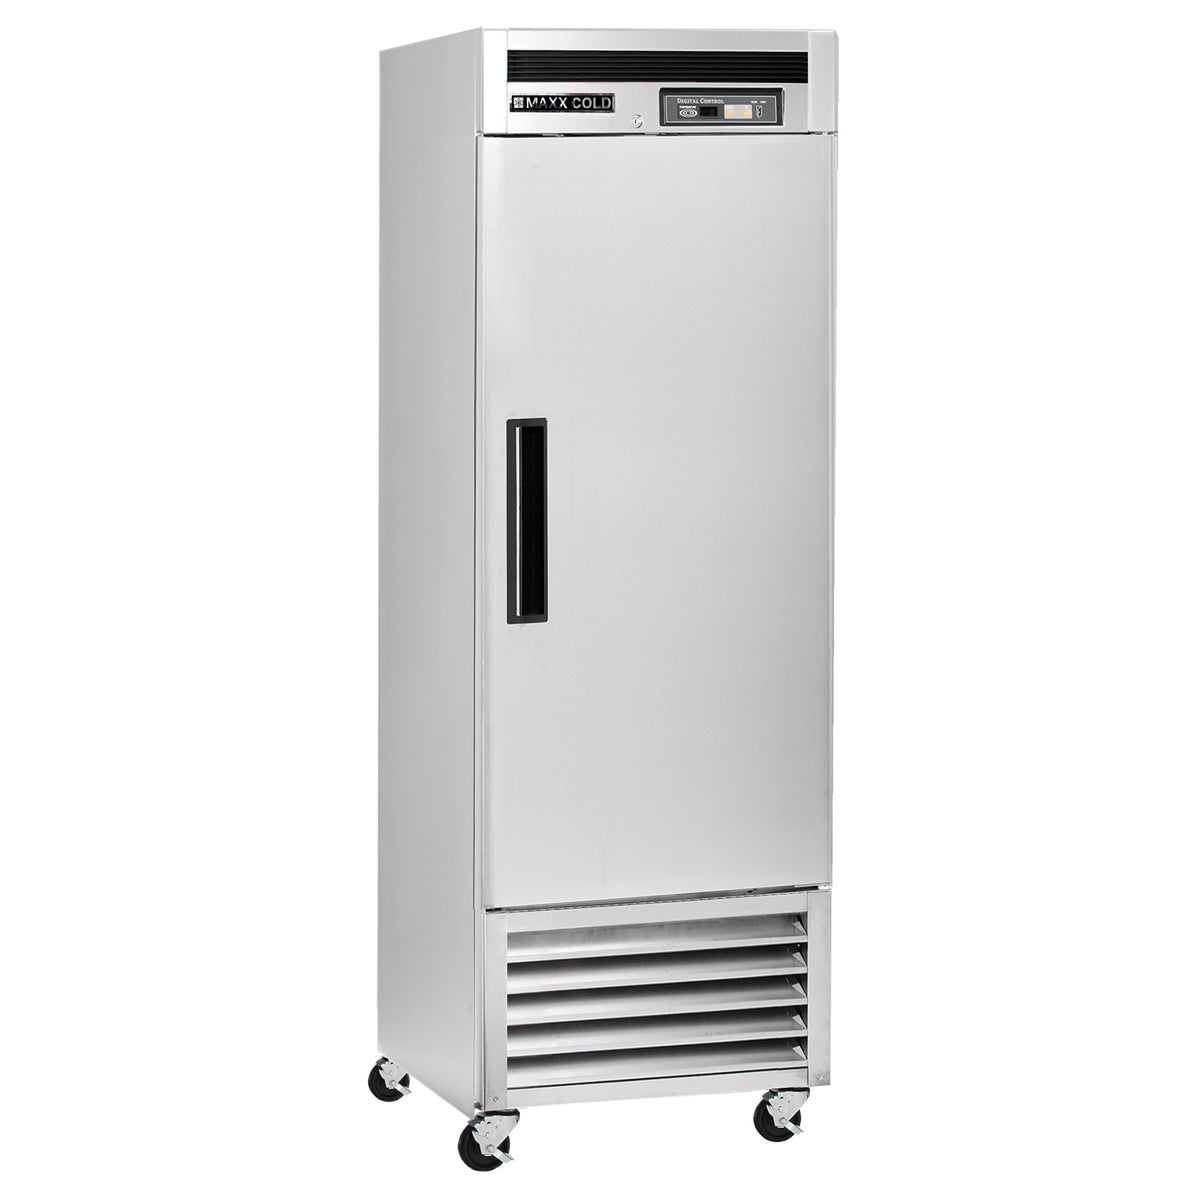 MCF-23FDHC Maxx Cold Single Door Reach-In Freezer, Bottom Mount, 23 cu. ft., Energy Star, Stainless Steel